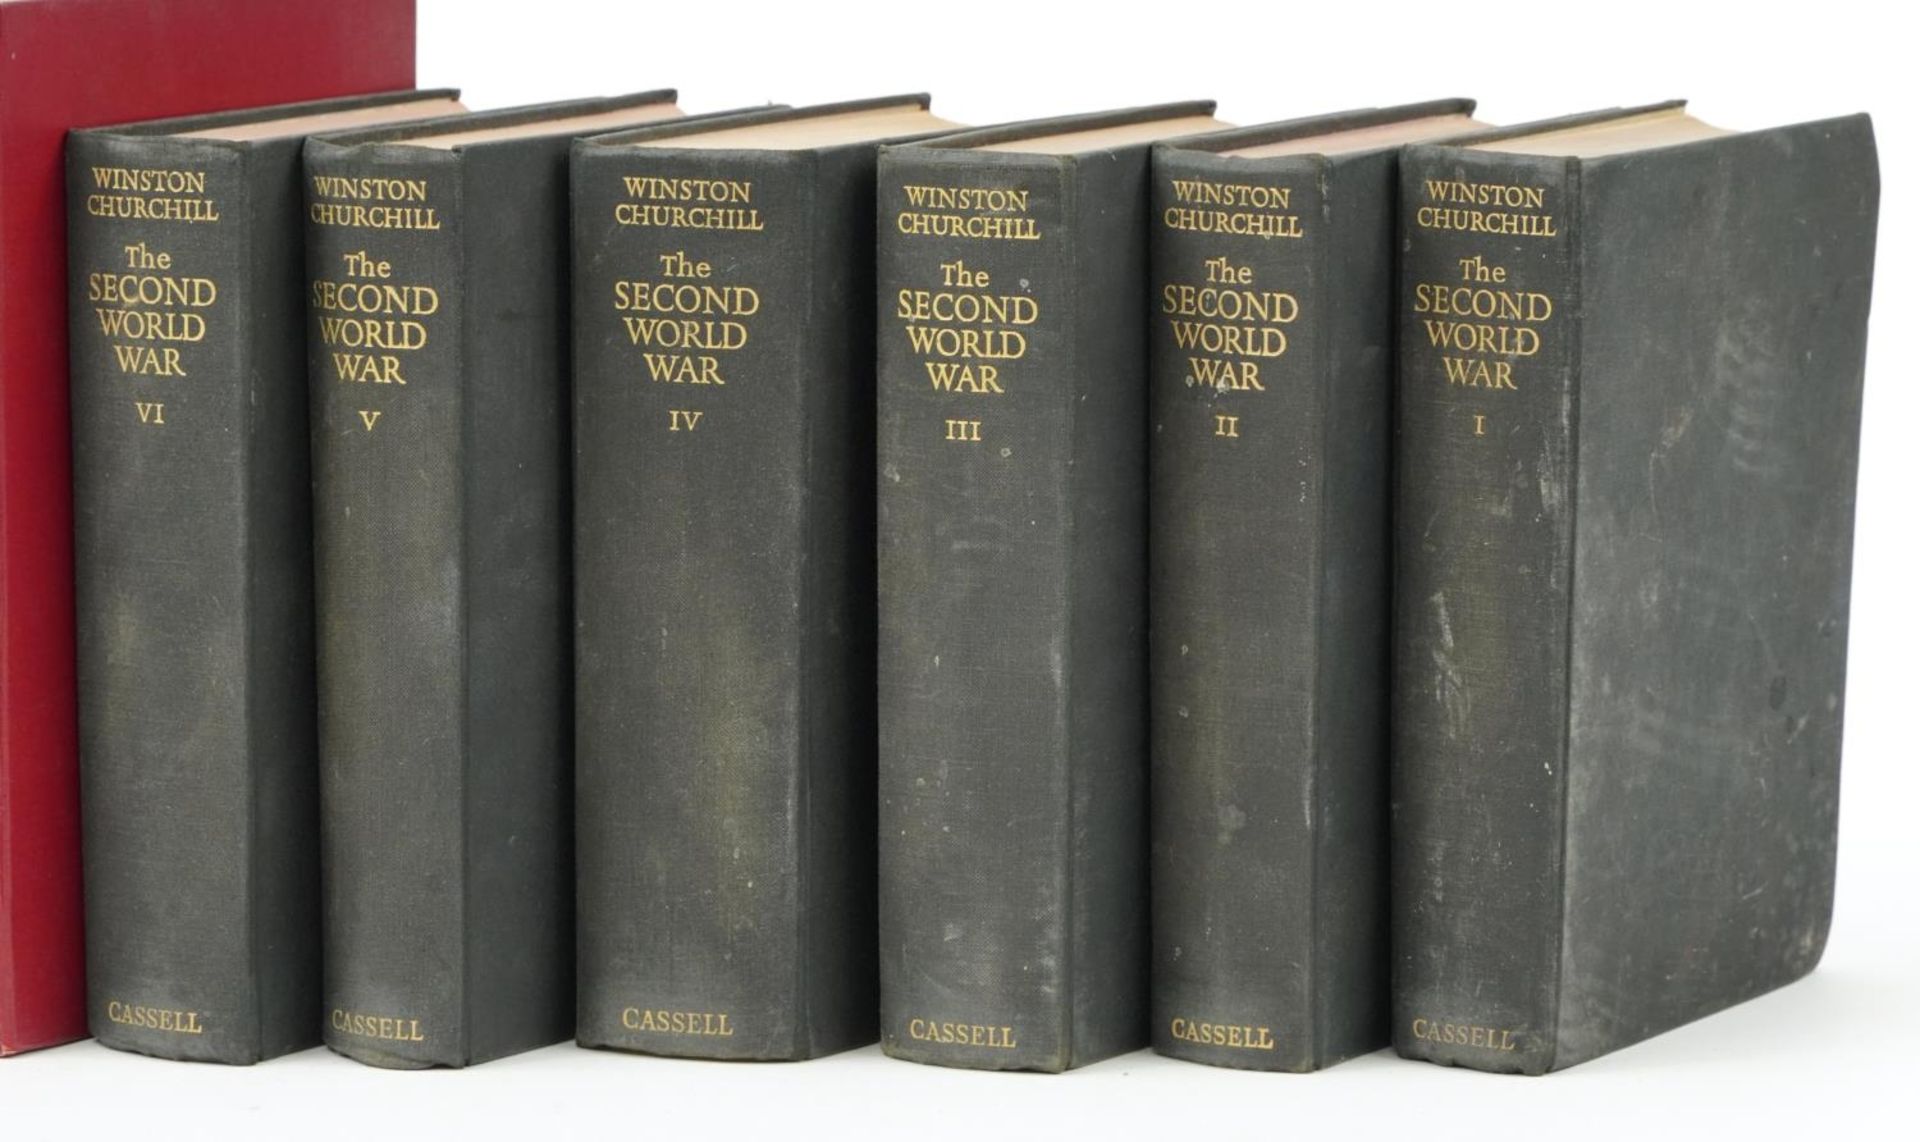 Winston Churchill hardback books comprising The Second World War, volumes 1-6 and A History of the - Image 3 of 5